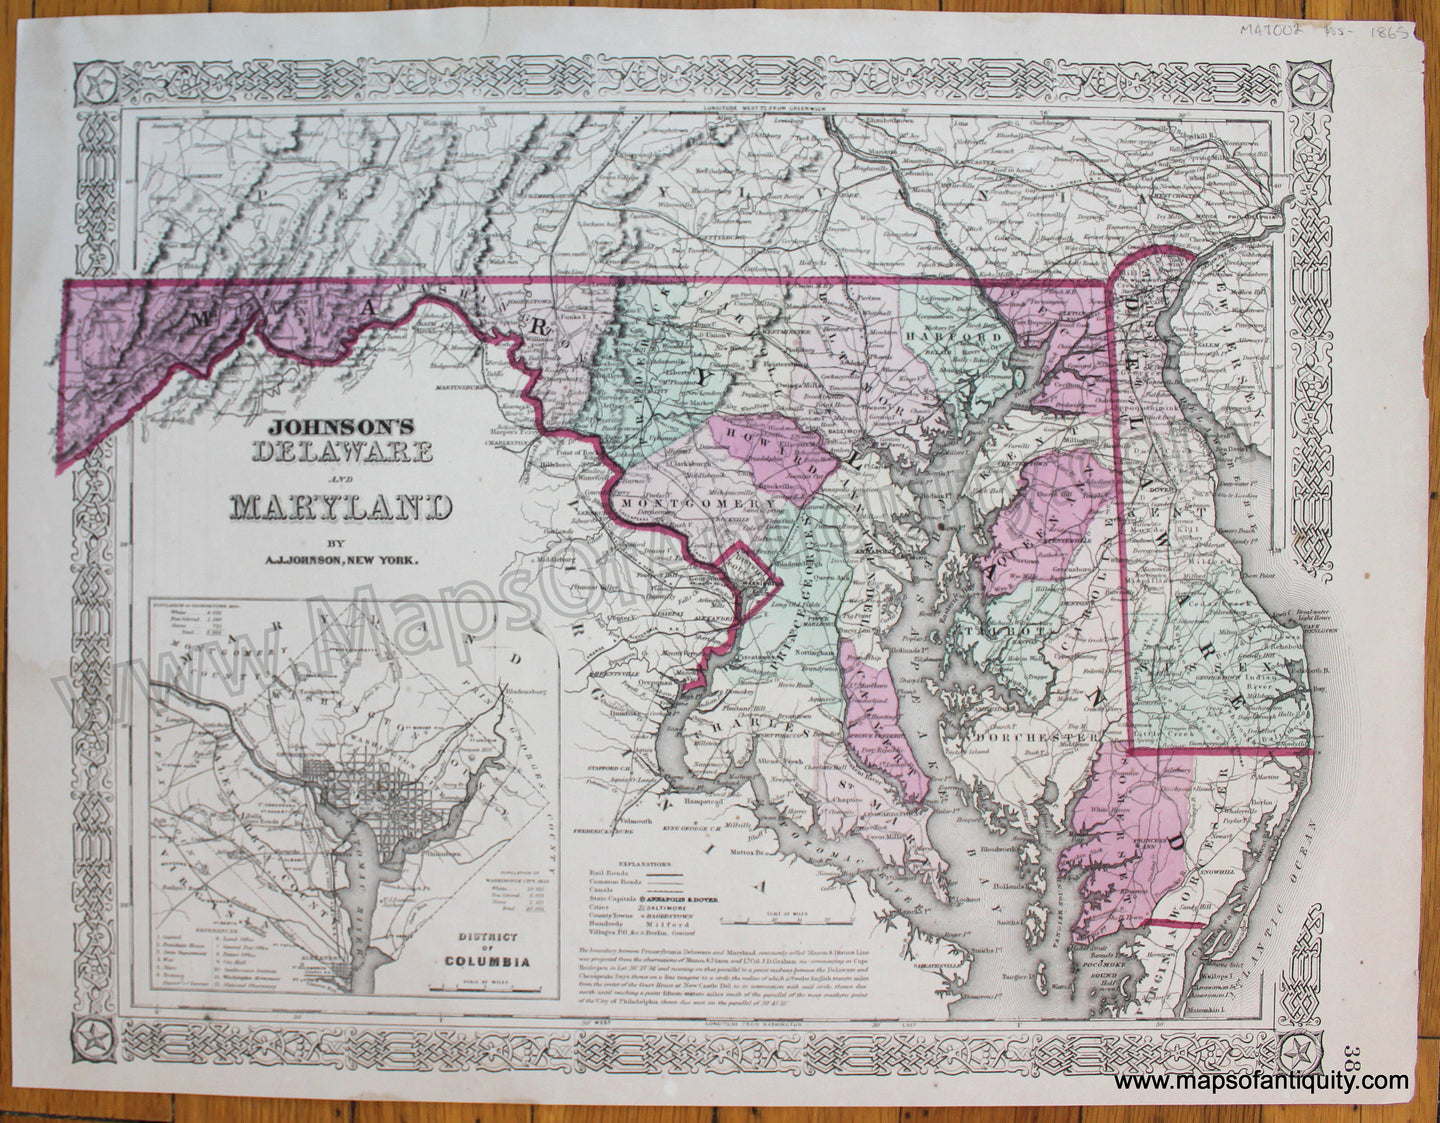 Antique-Map-Johnson's-Delaware-and-Maryland-By-Johnson-1865-1860s-1800s-Mid-Late-19th-Century-Maps-of-Antiquity